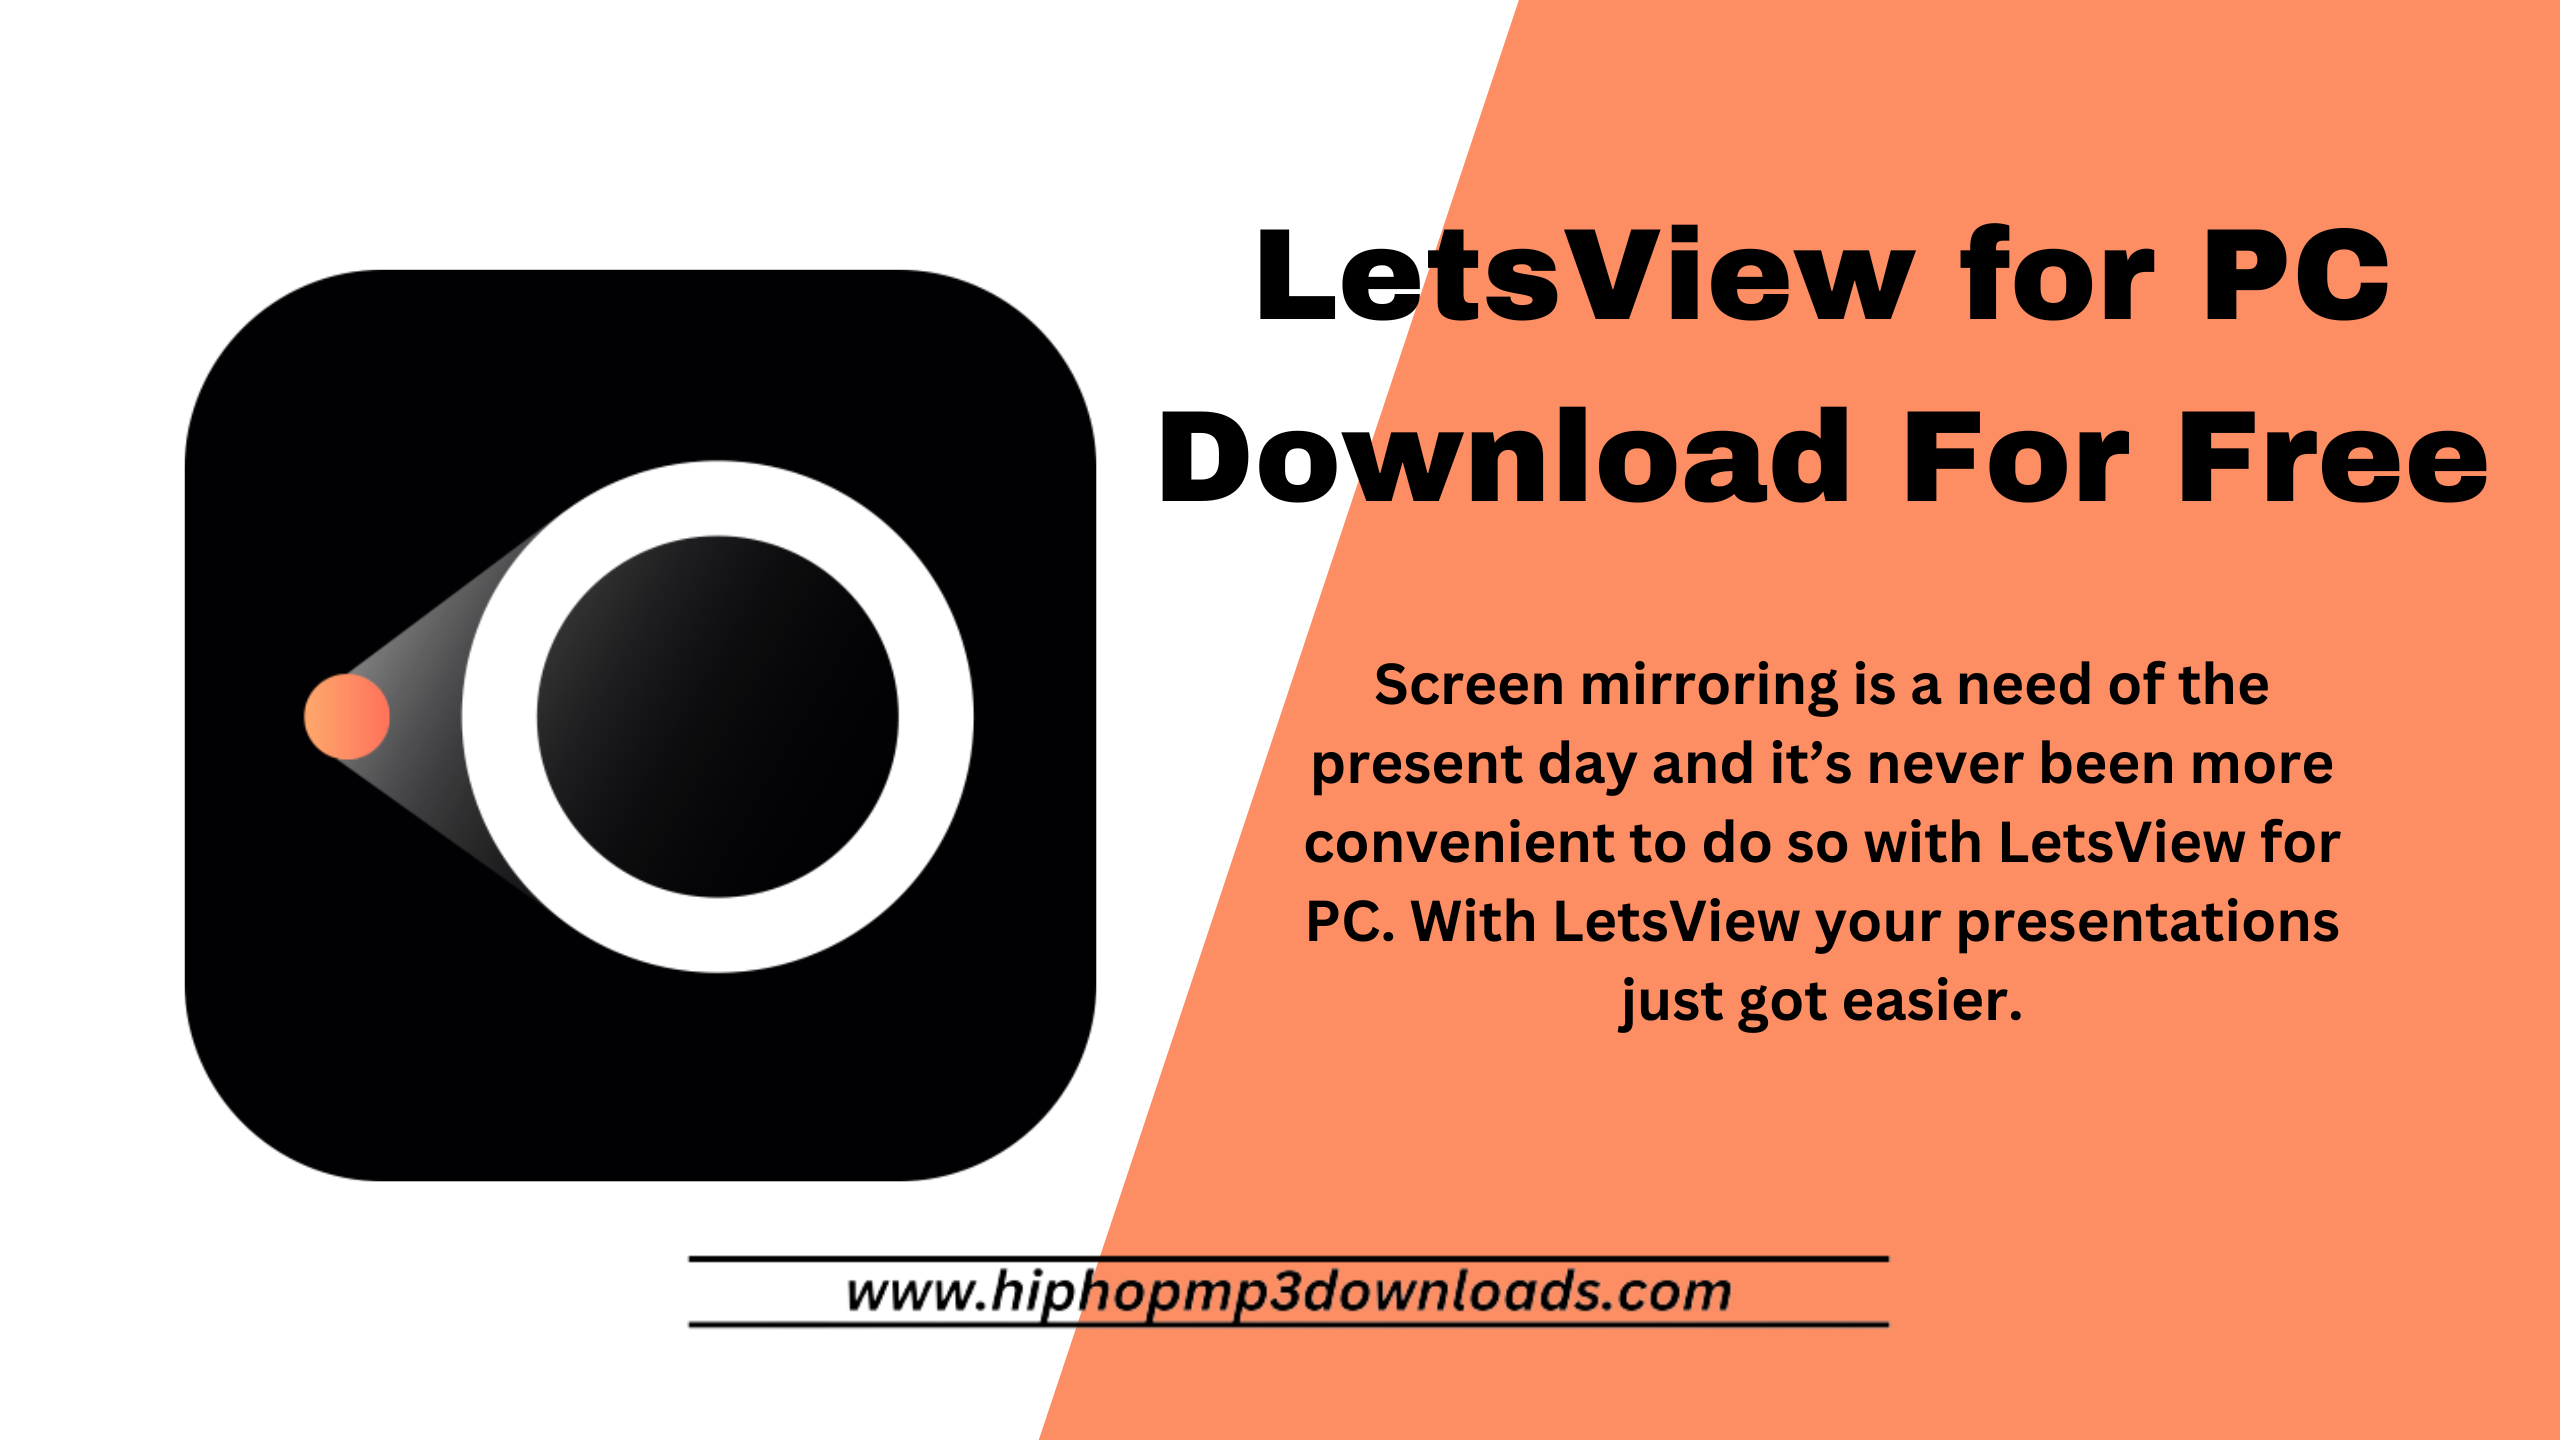 LetsView for PC Download For Free